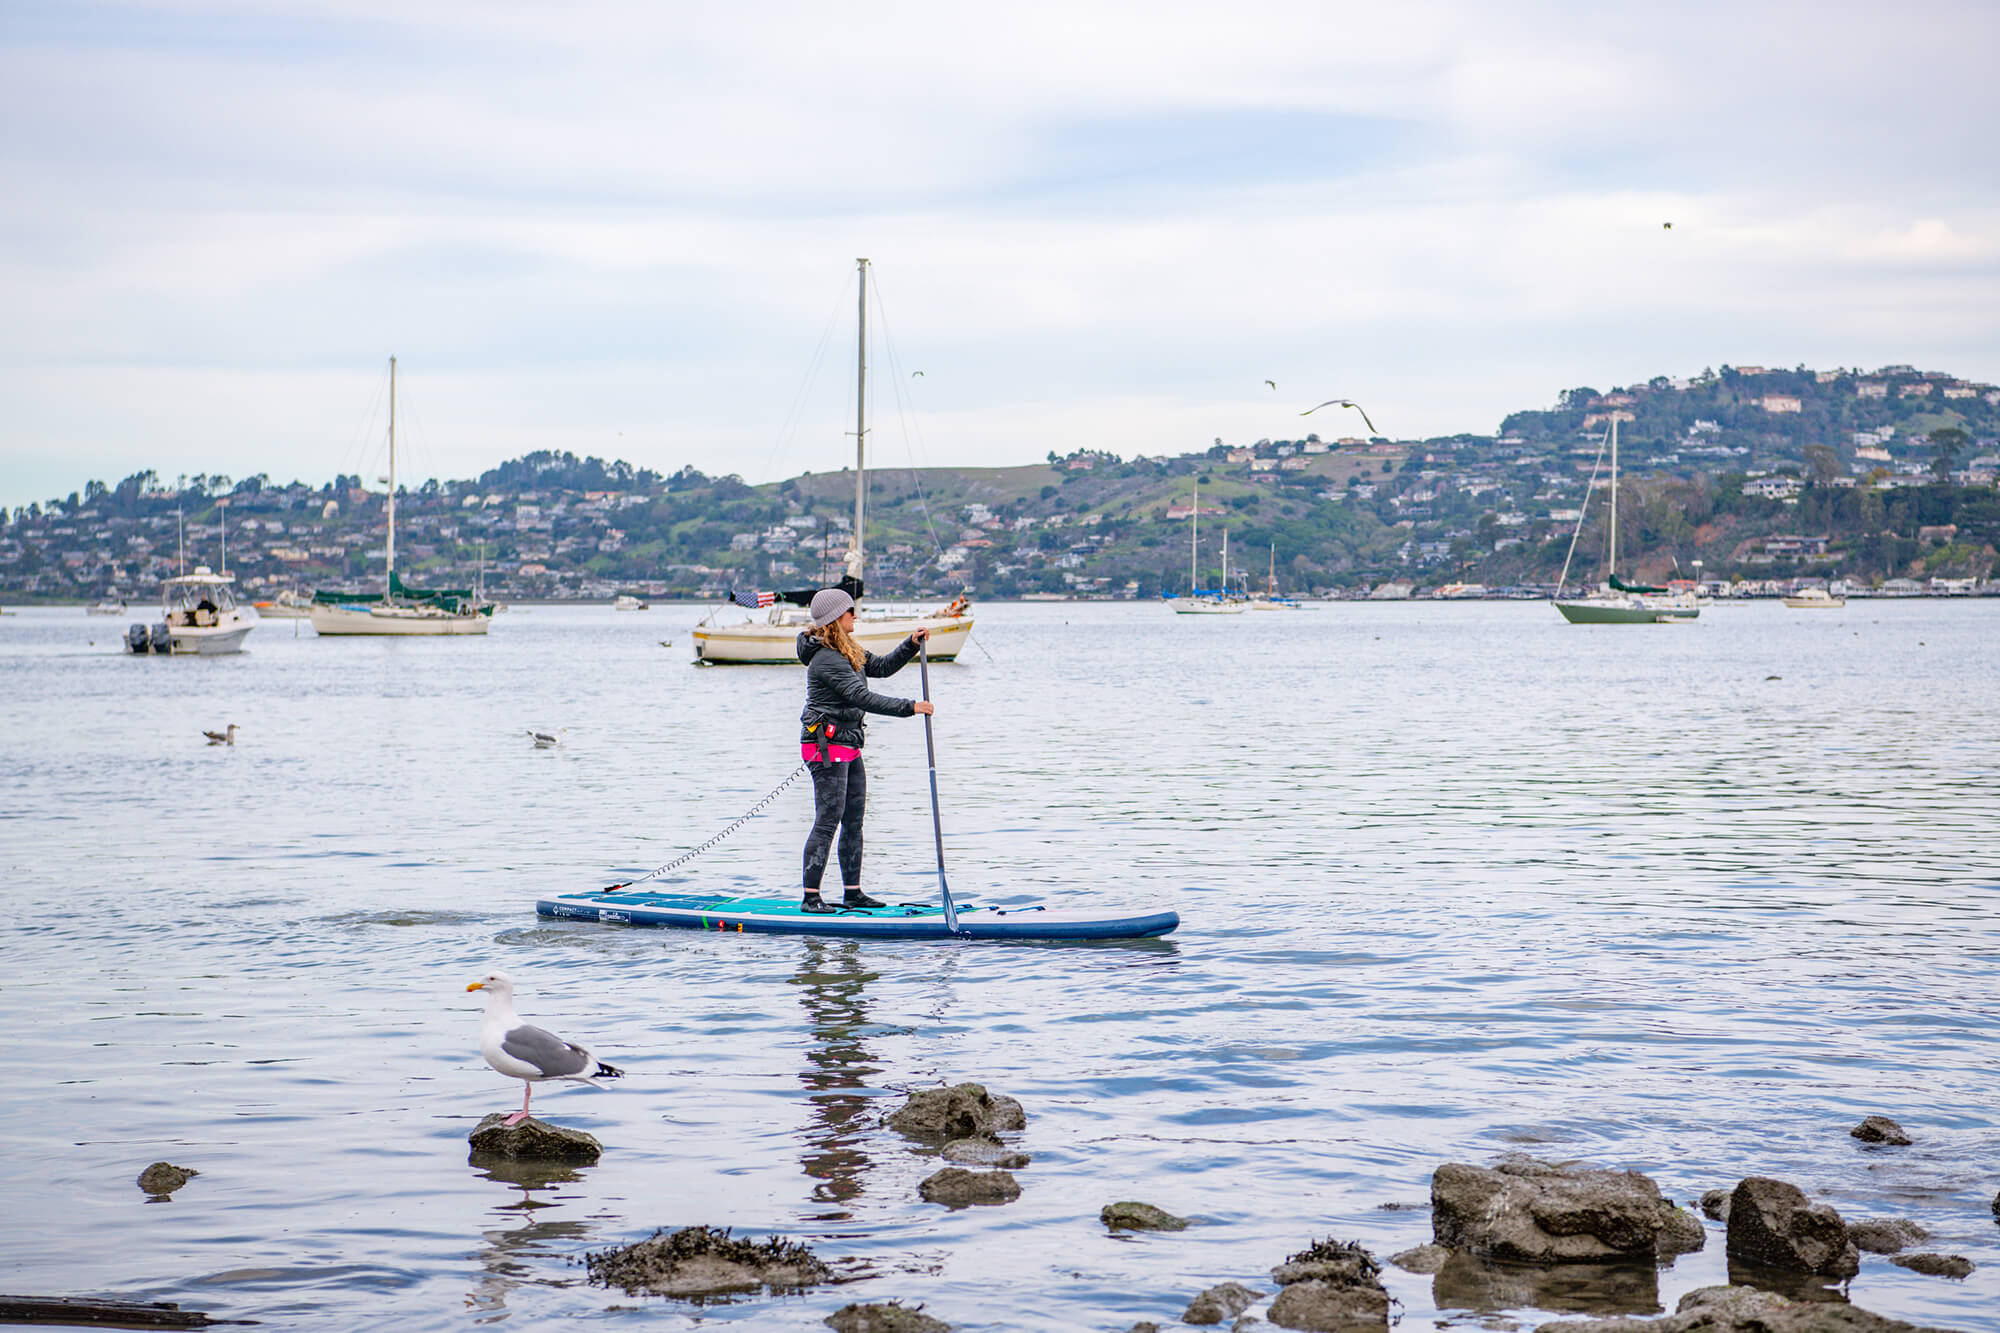 Woman Paddle Boarding In San Francisco with Sail Yachts In The Background